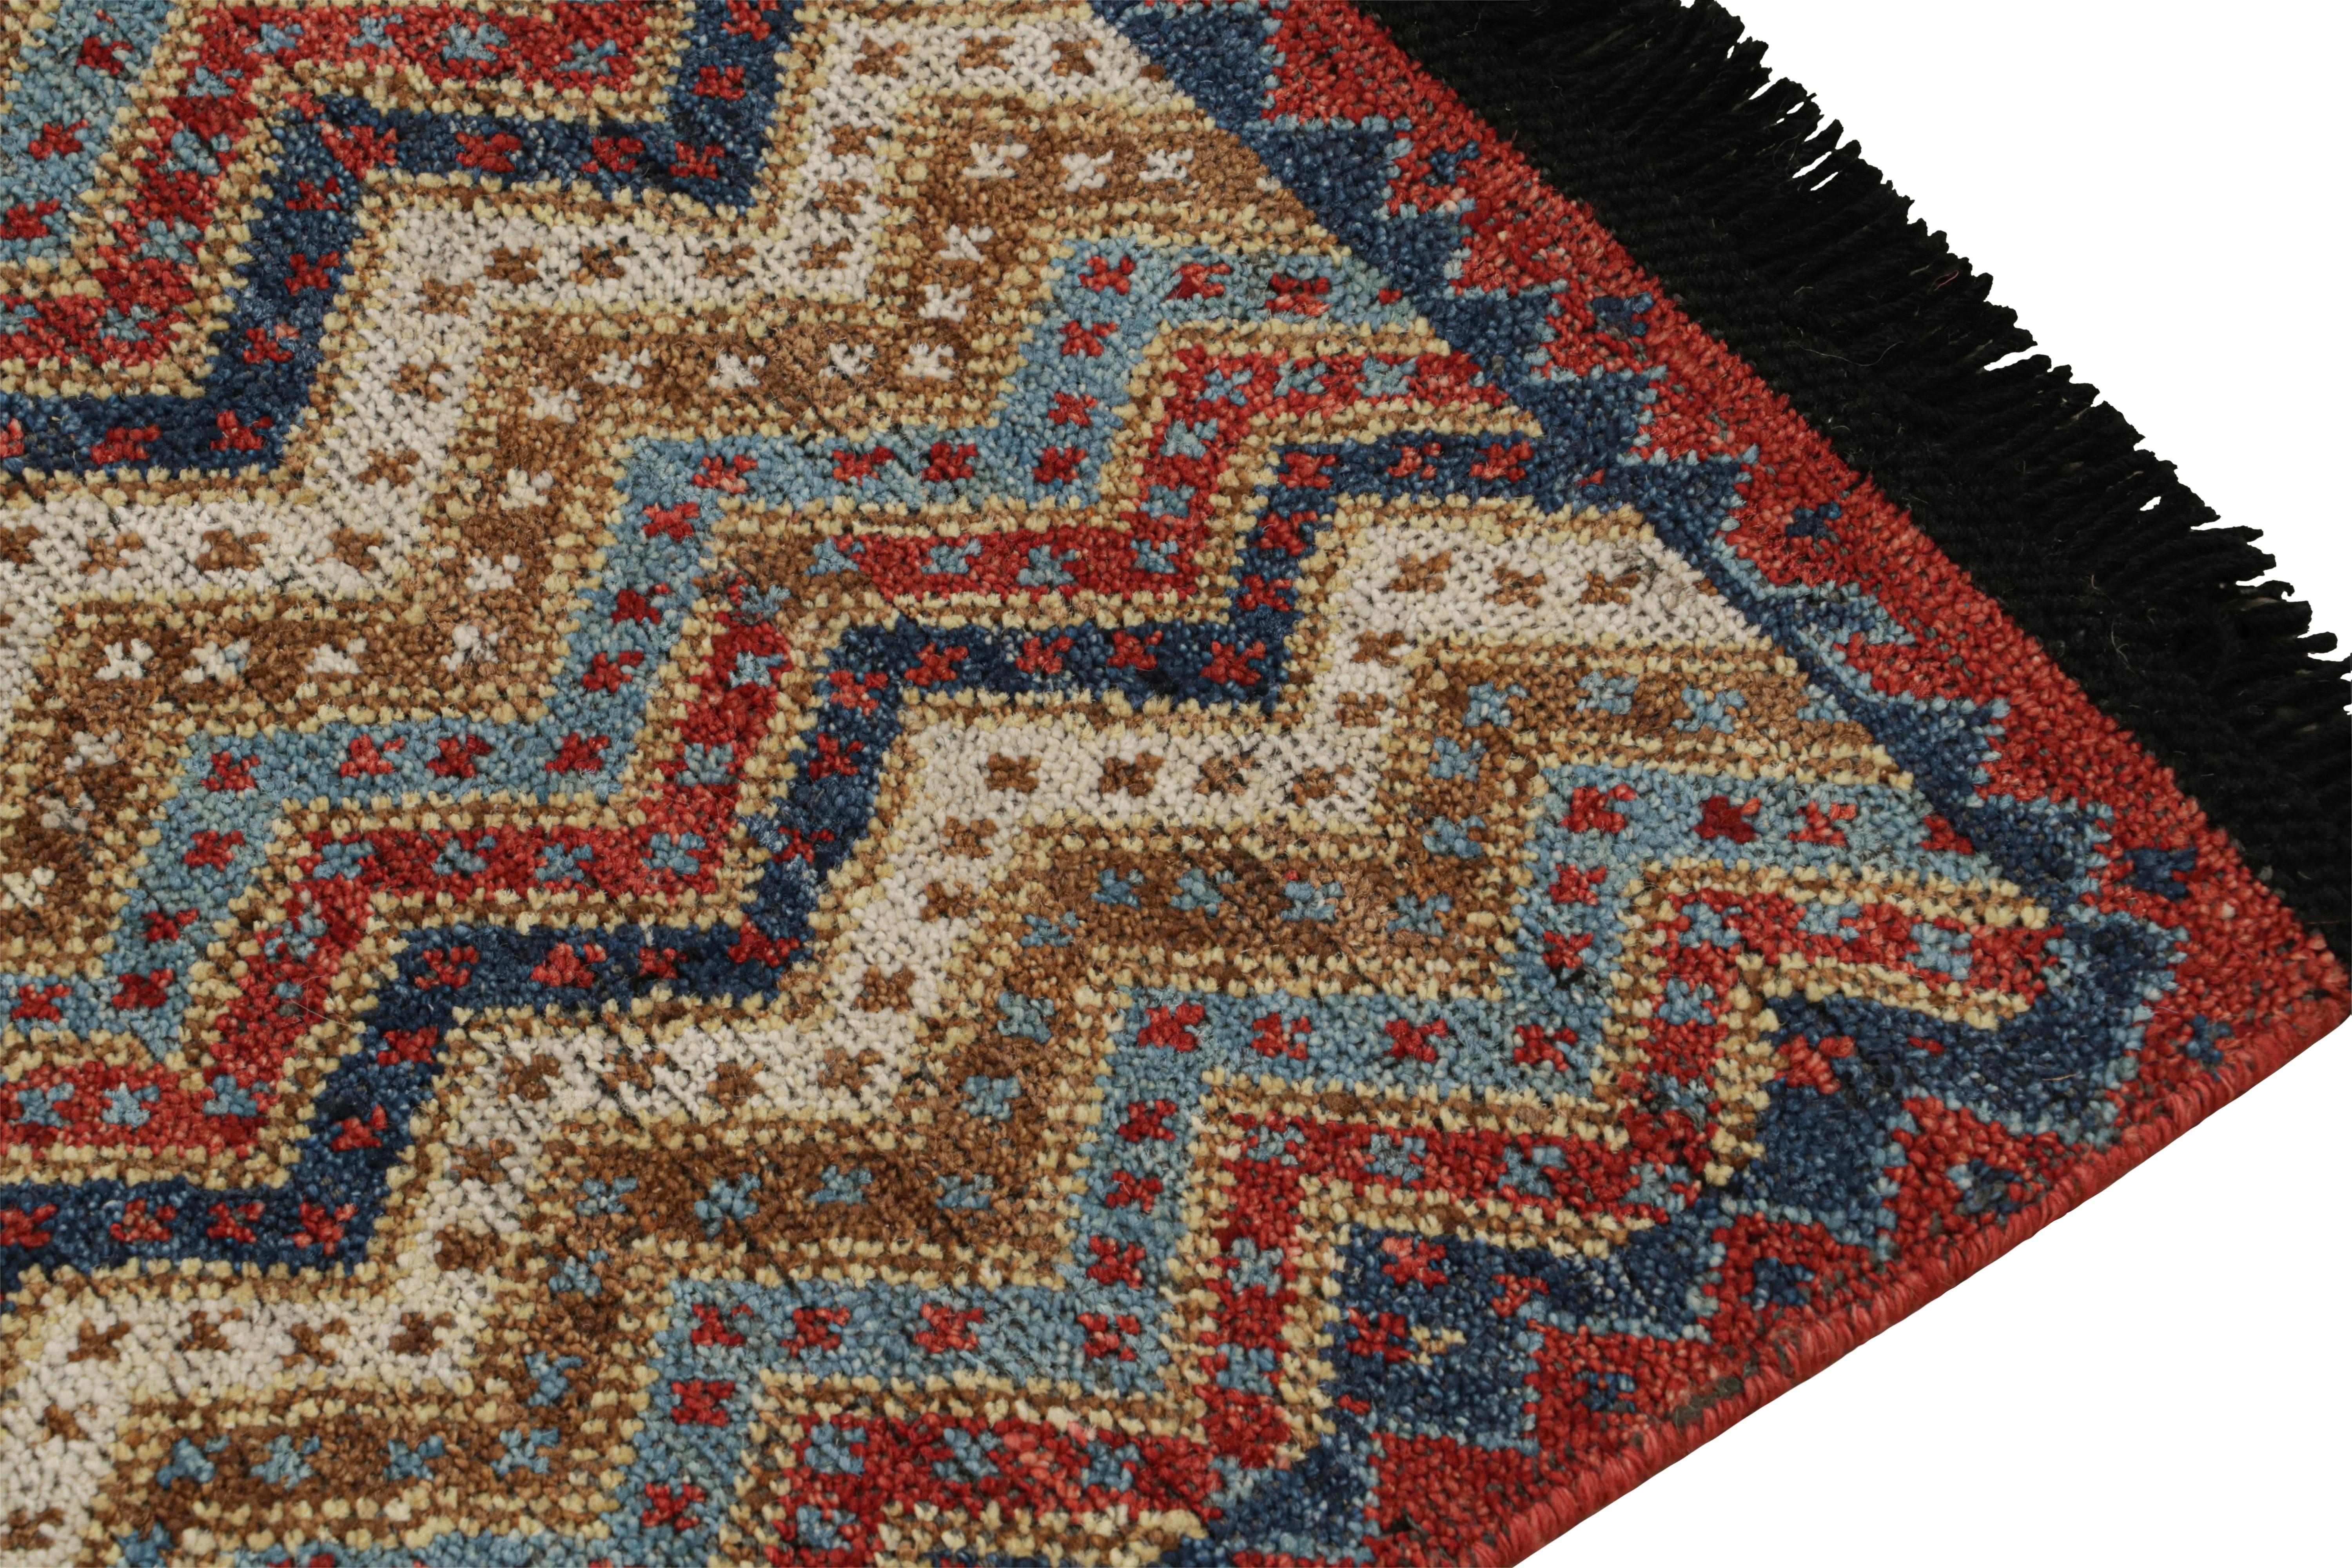 This gift-sized 2x3 rug is a new addition to the custom classics Burano Collection by Rug & Kilim. Hand-knotted in wool, this line explores the most iconic antique rug styles in history with a smart contemporary approach. 

On the Design: 

This rug